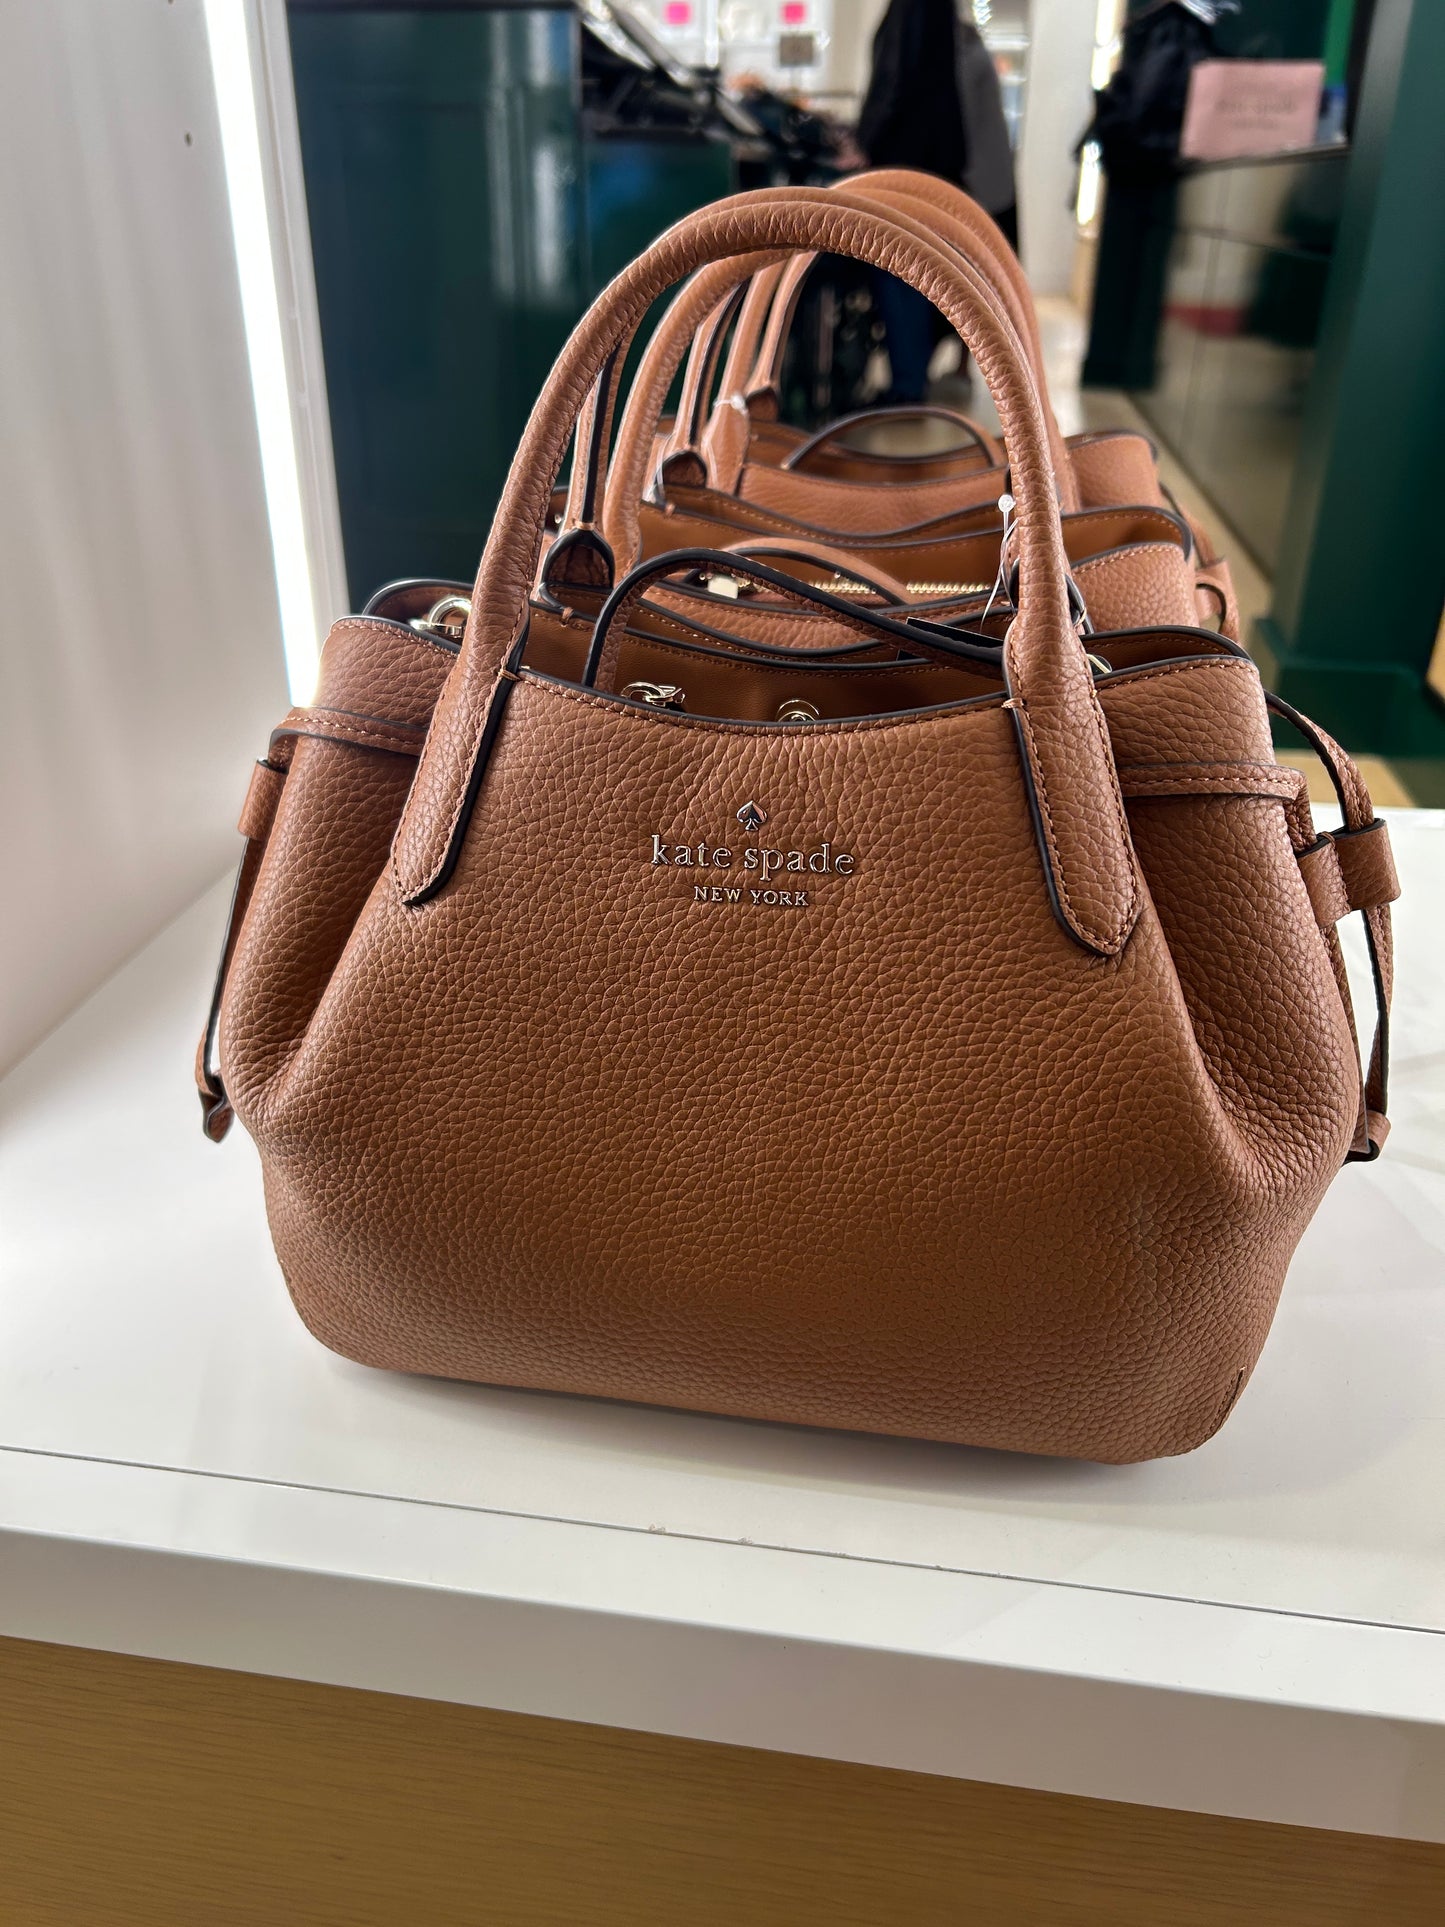 Load image into Gallery viewer, Kate Spade Dumpling Small Satchel In Warm Gingerbread (Pre-order)
